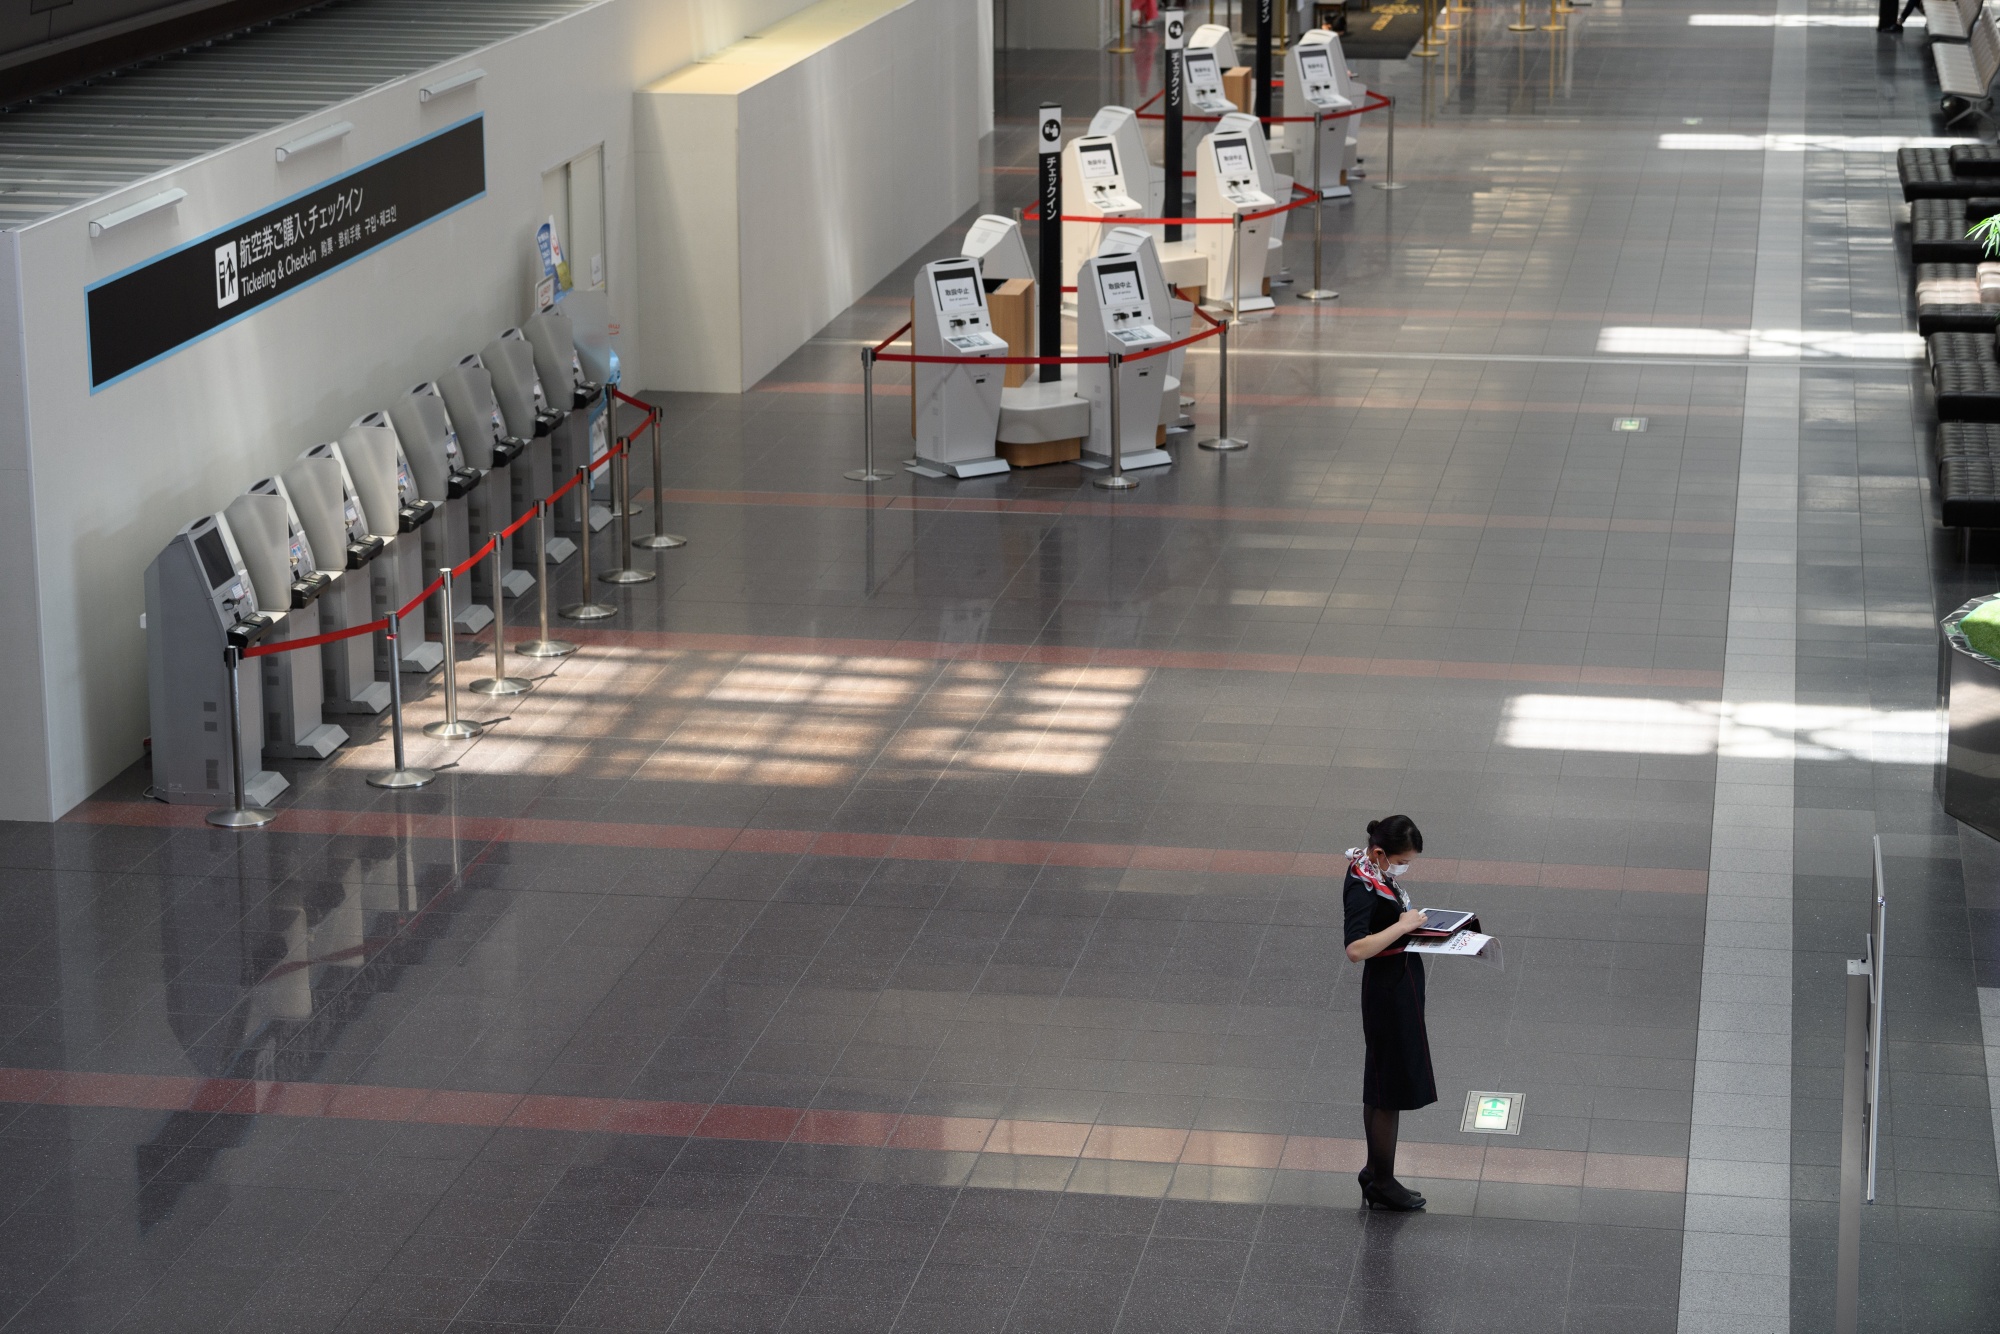 A JAL employee at Haneda Airport’s check-in area in April.